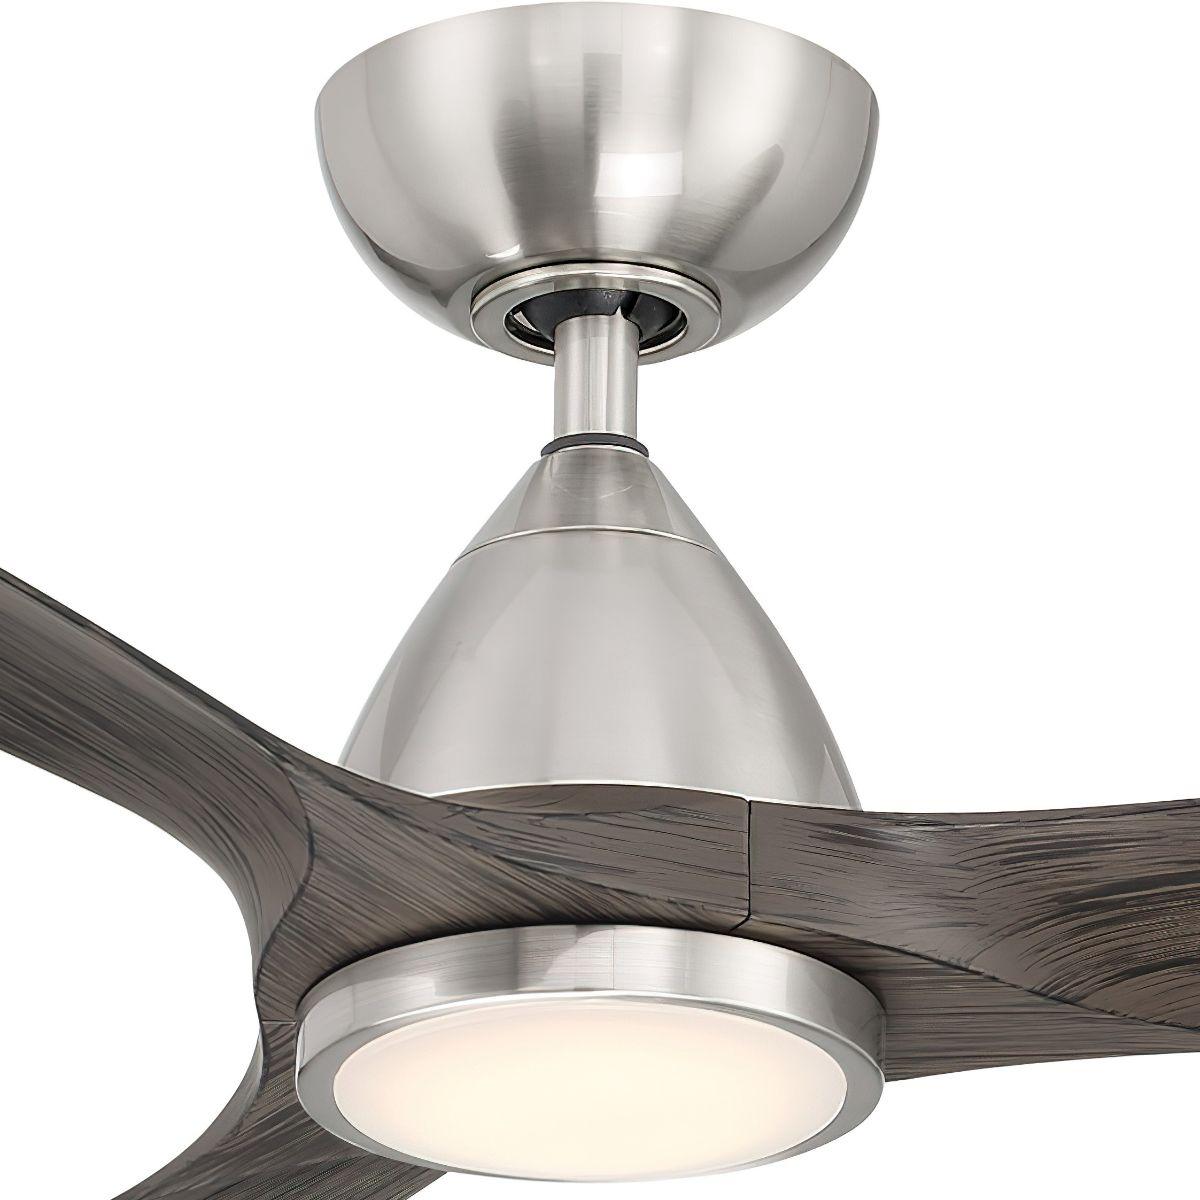 Skylark 54 Inch Modern Outdoor Smart Ceiling Fan With 2700K LED And Remote